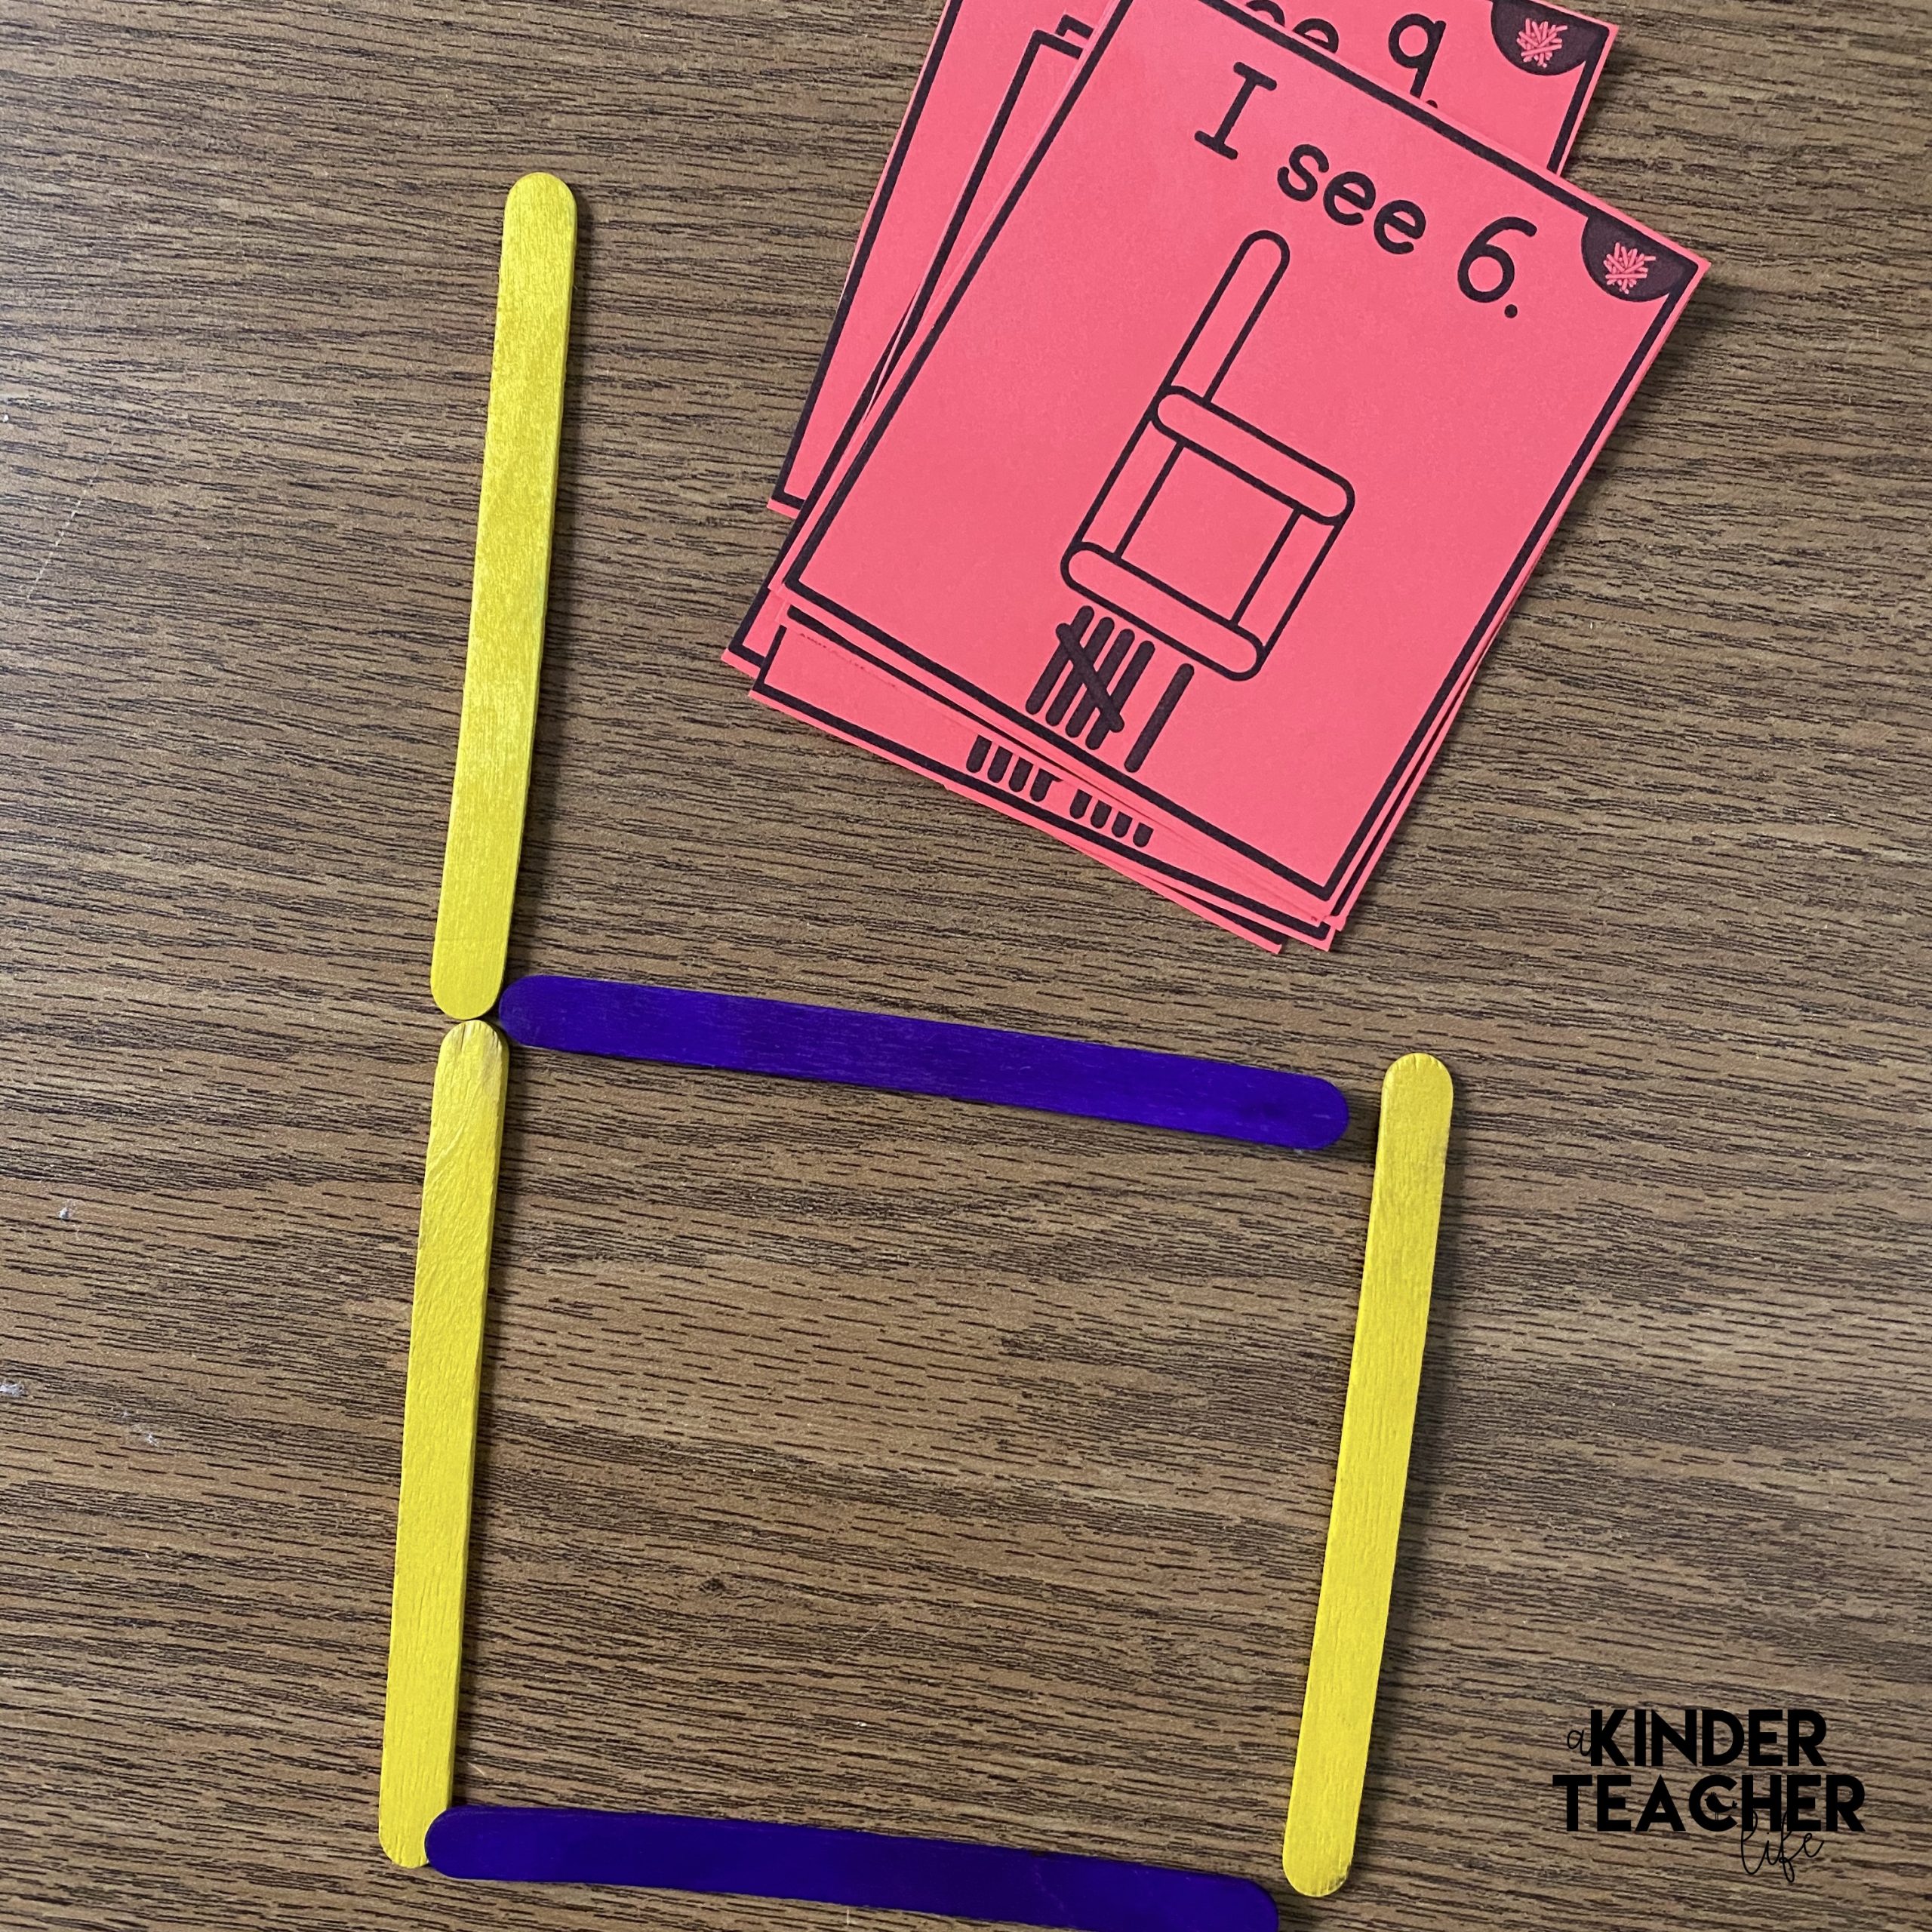 Craft Sticks Task Cards - Use craft sticks to build numbers and letters.